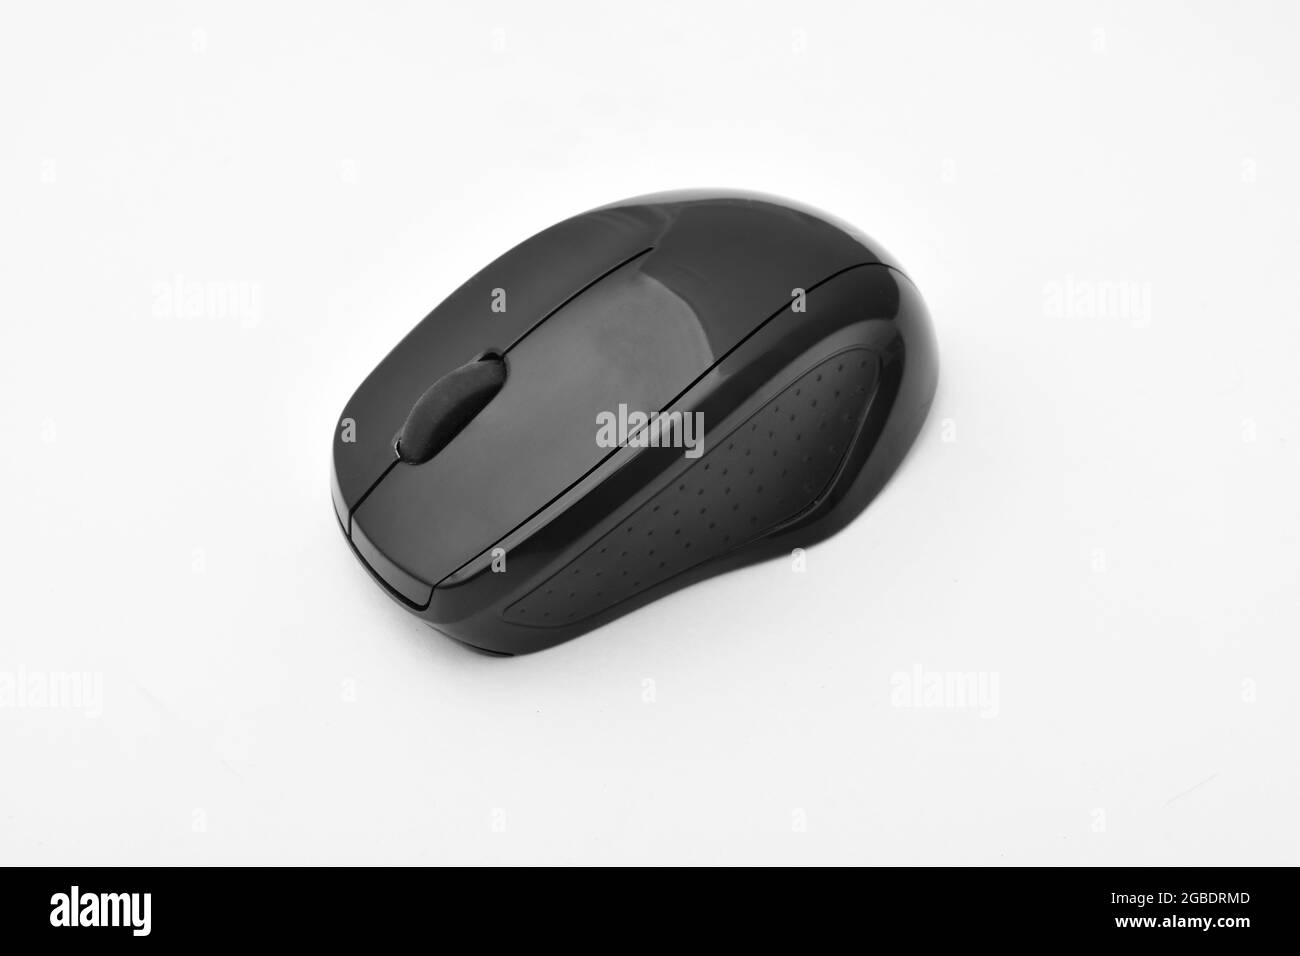 Wireless Mouse Isolated On White Background With Clipping Path Stock Photo